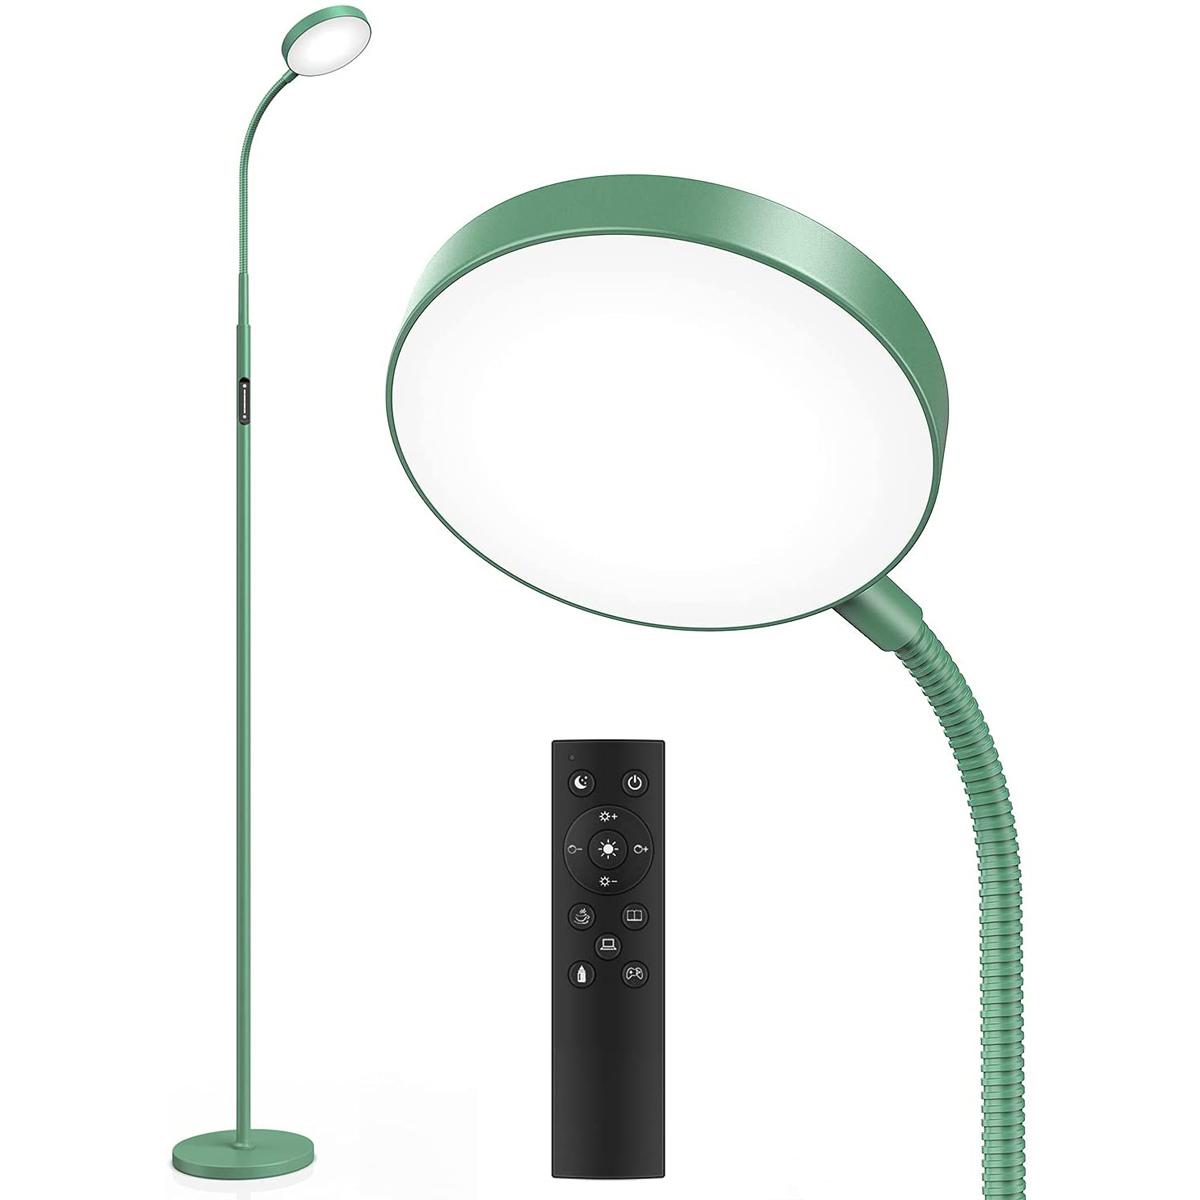 Joofo LED Floor Lamp with Remote Control for $29.99 Shipped